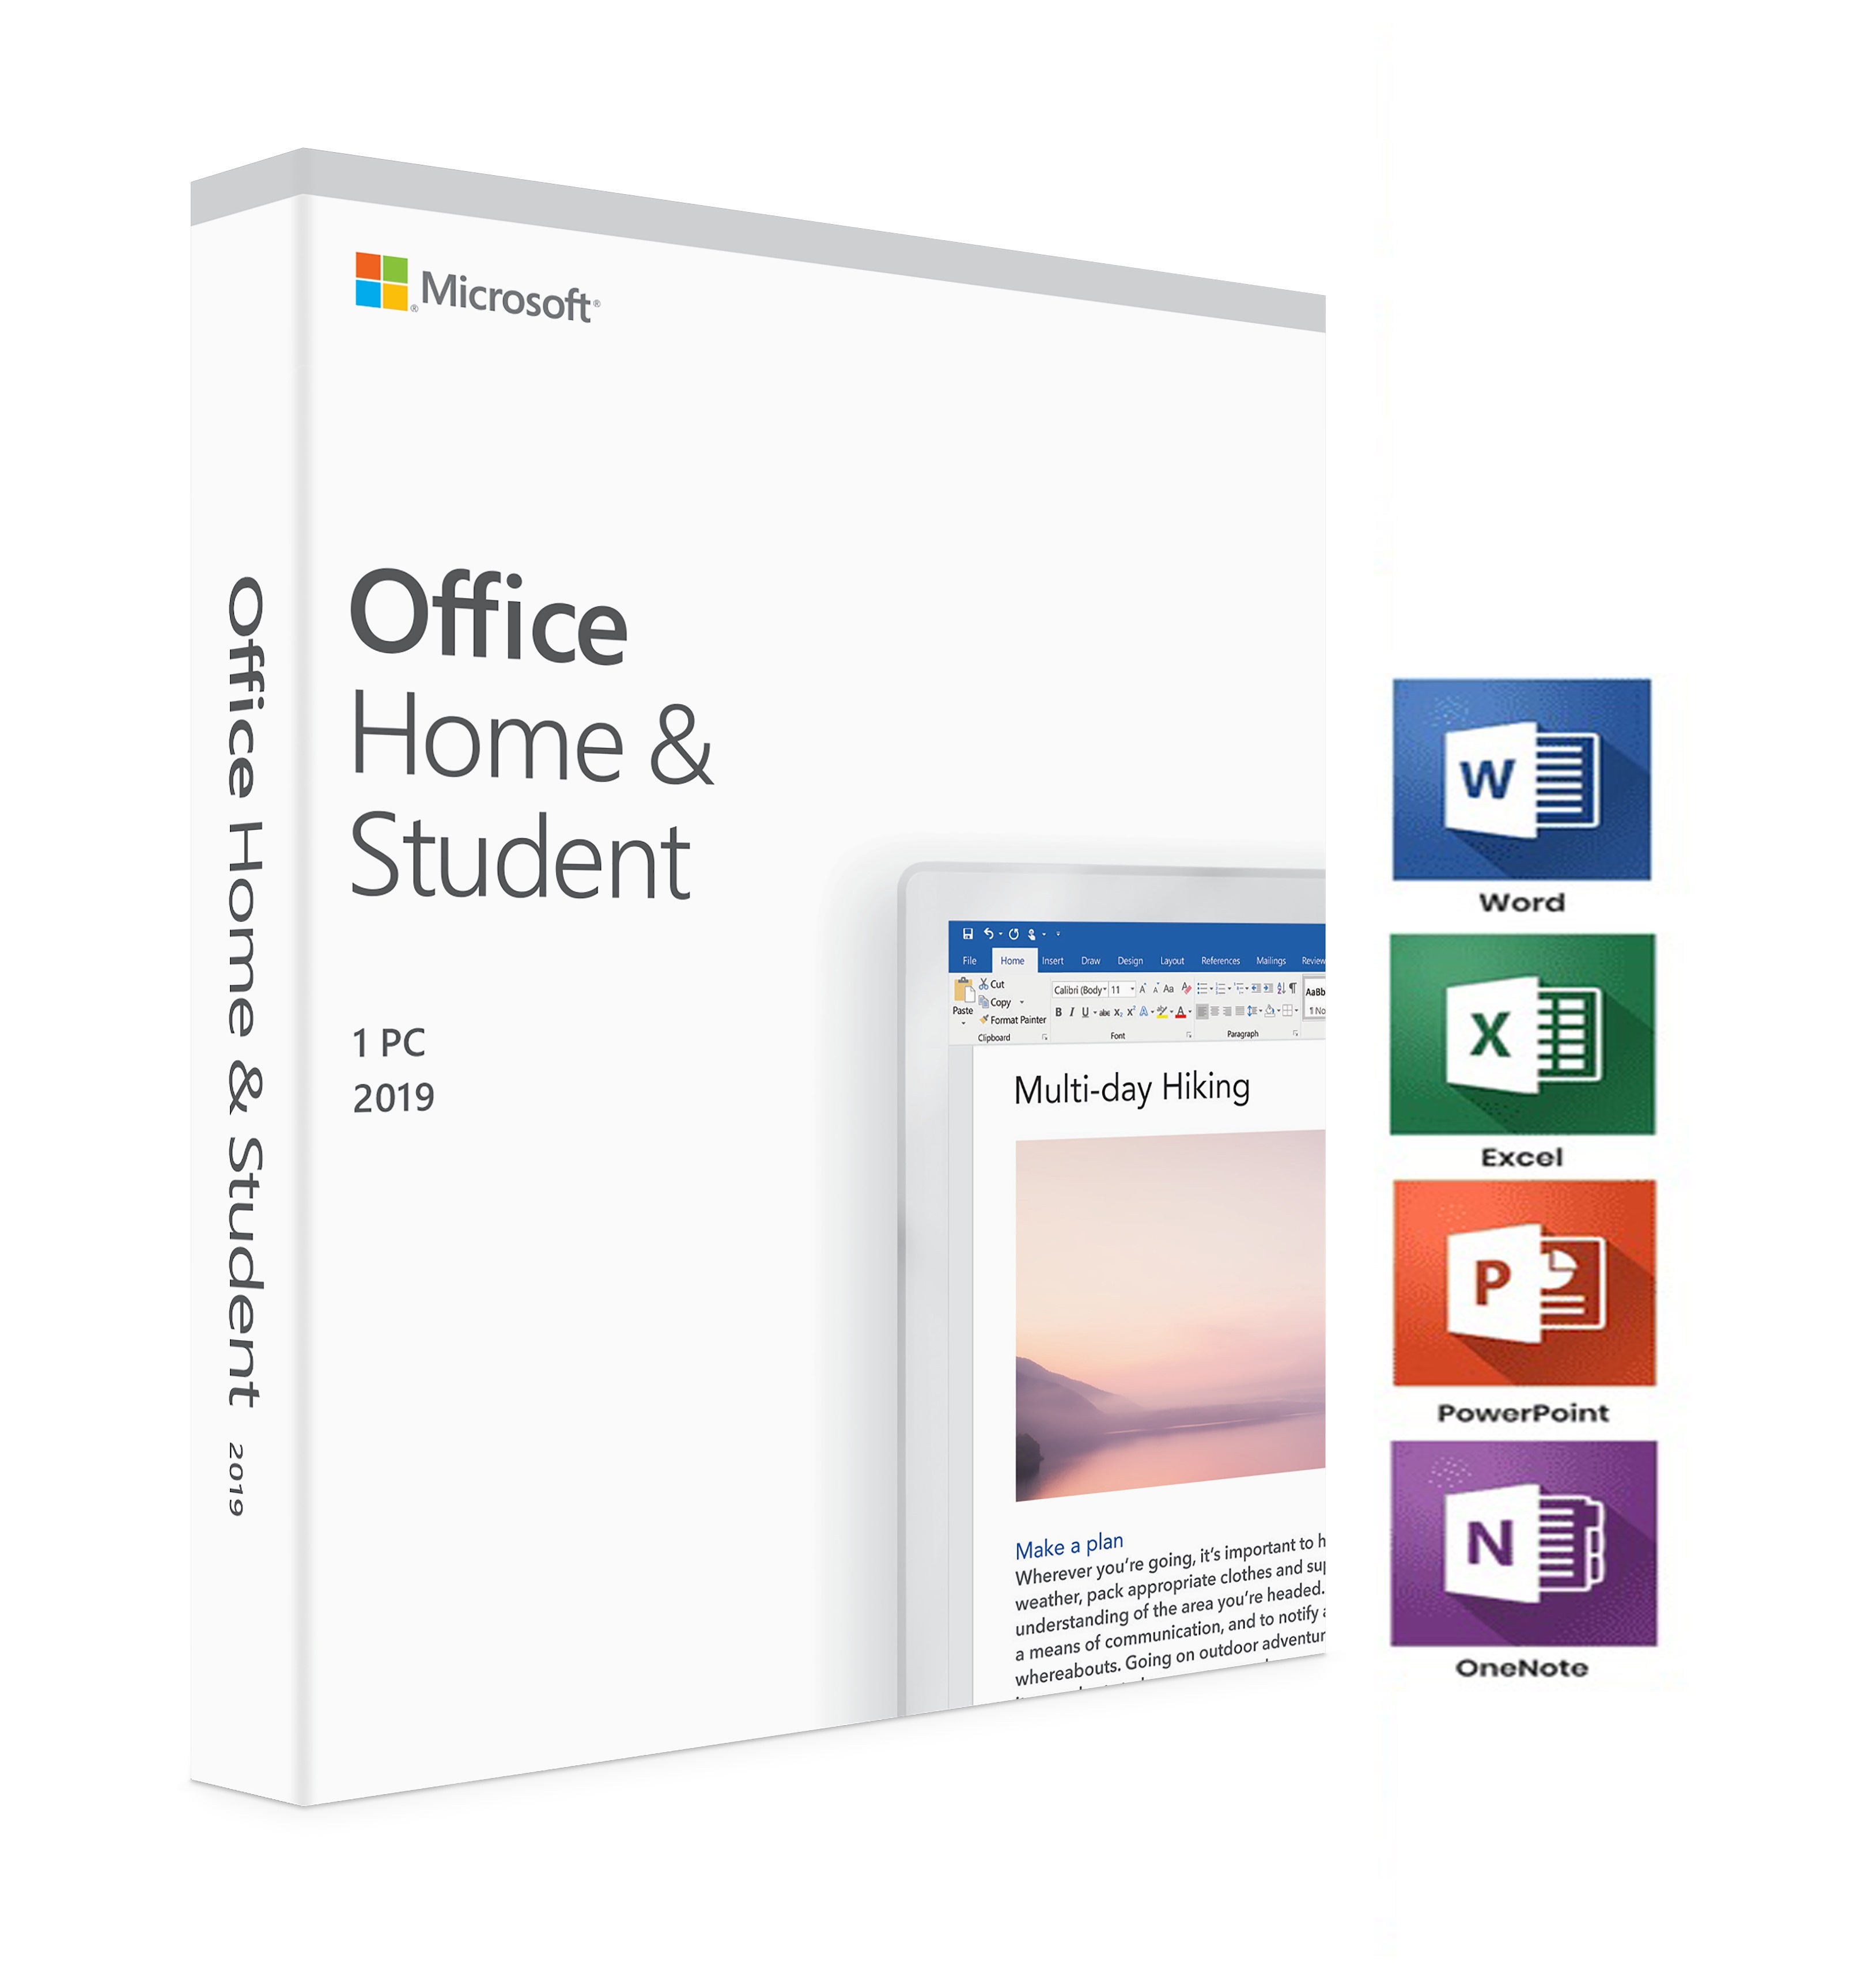 microsoft office home & student 2019 outlook